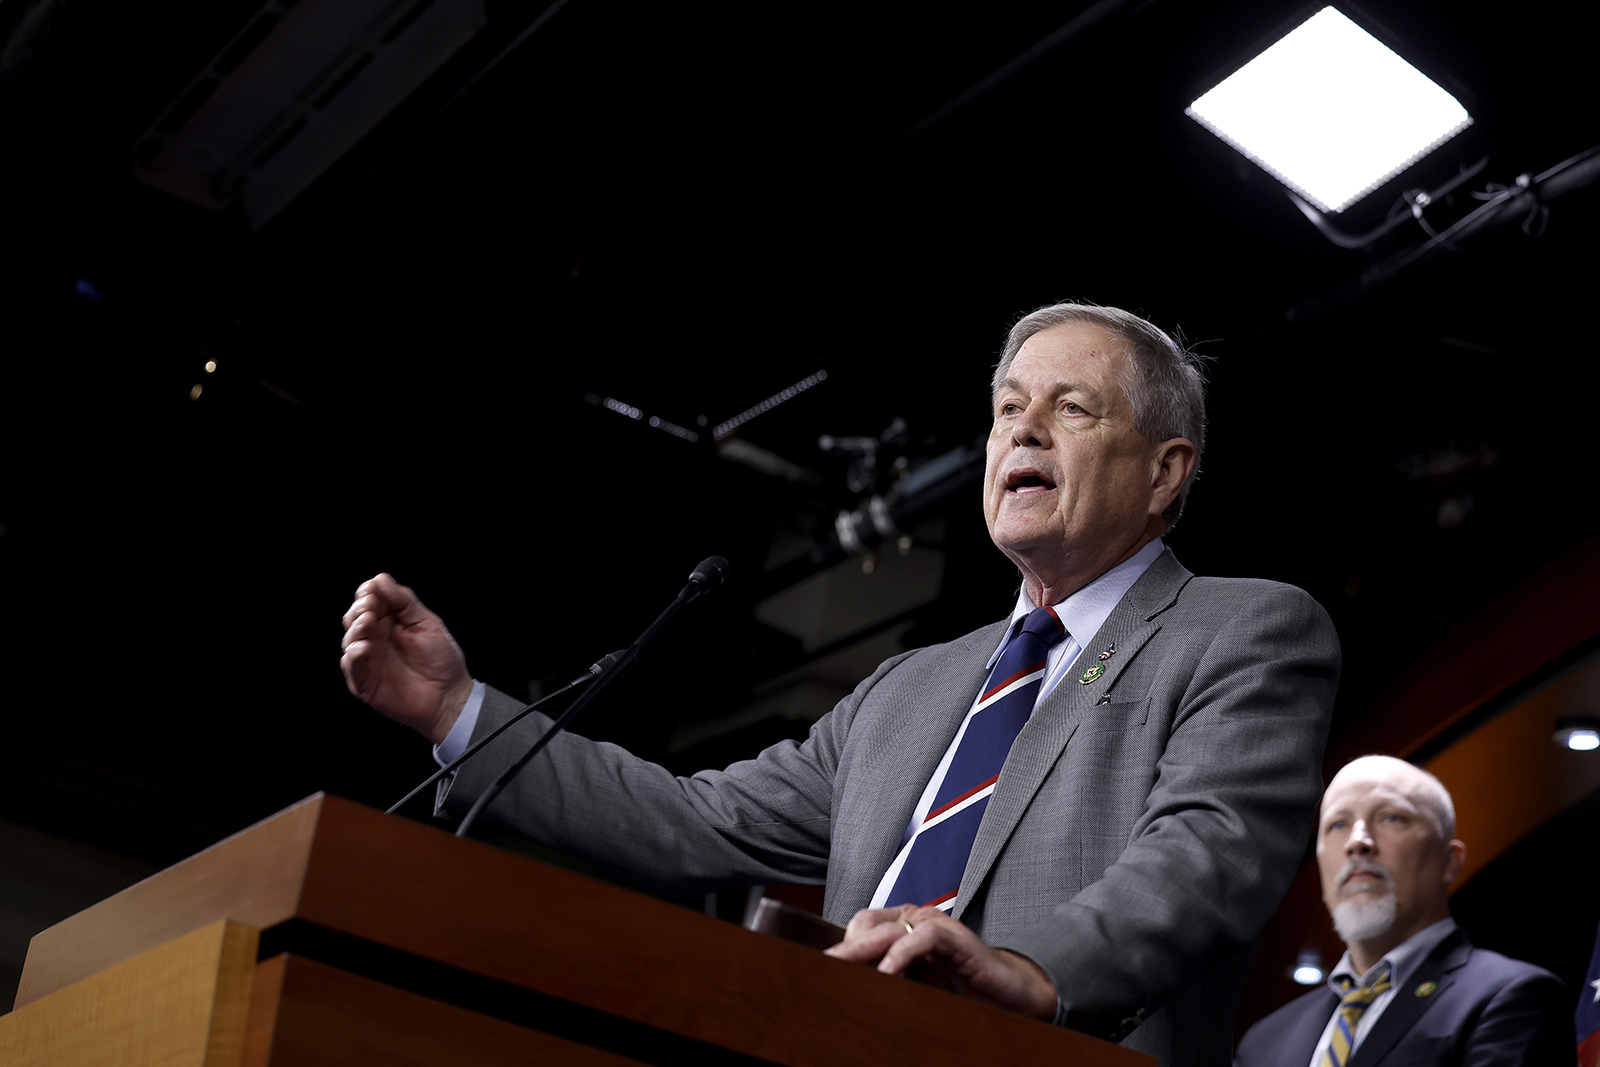 Rep. Ralph Norman (R-SC) speaking during a news conference with the House Freedom Caucus on the debt limit negotiations at the U.S. Capitol Building on March 10.